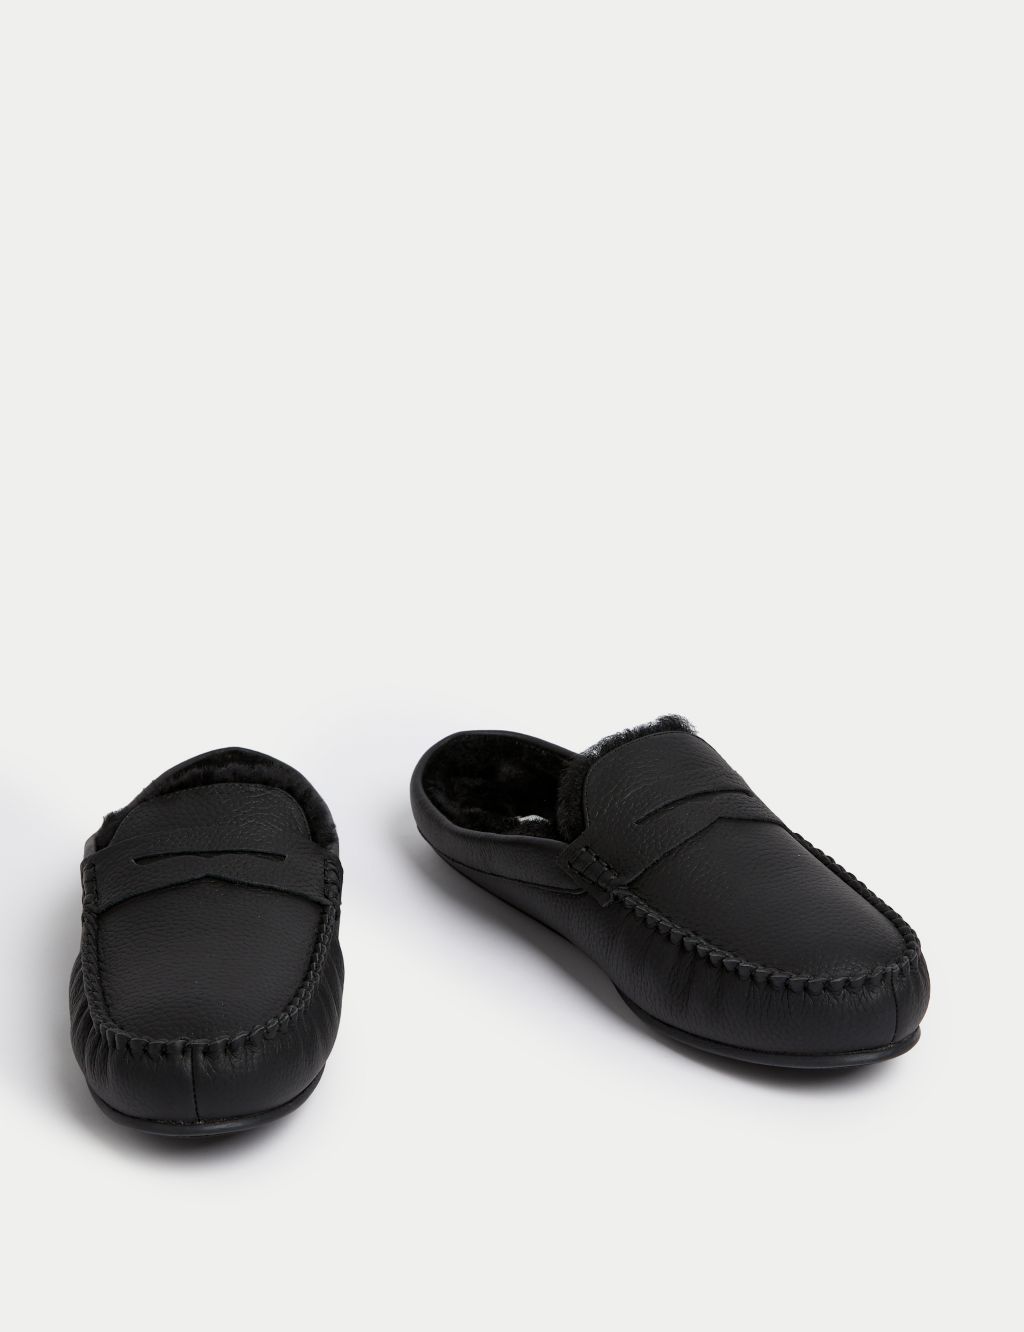 Leather Moccasin Mule Slippers with Freshfeet™ image 2